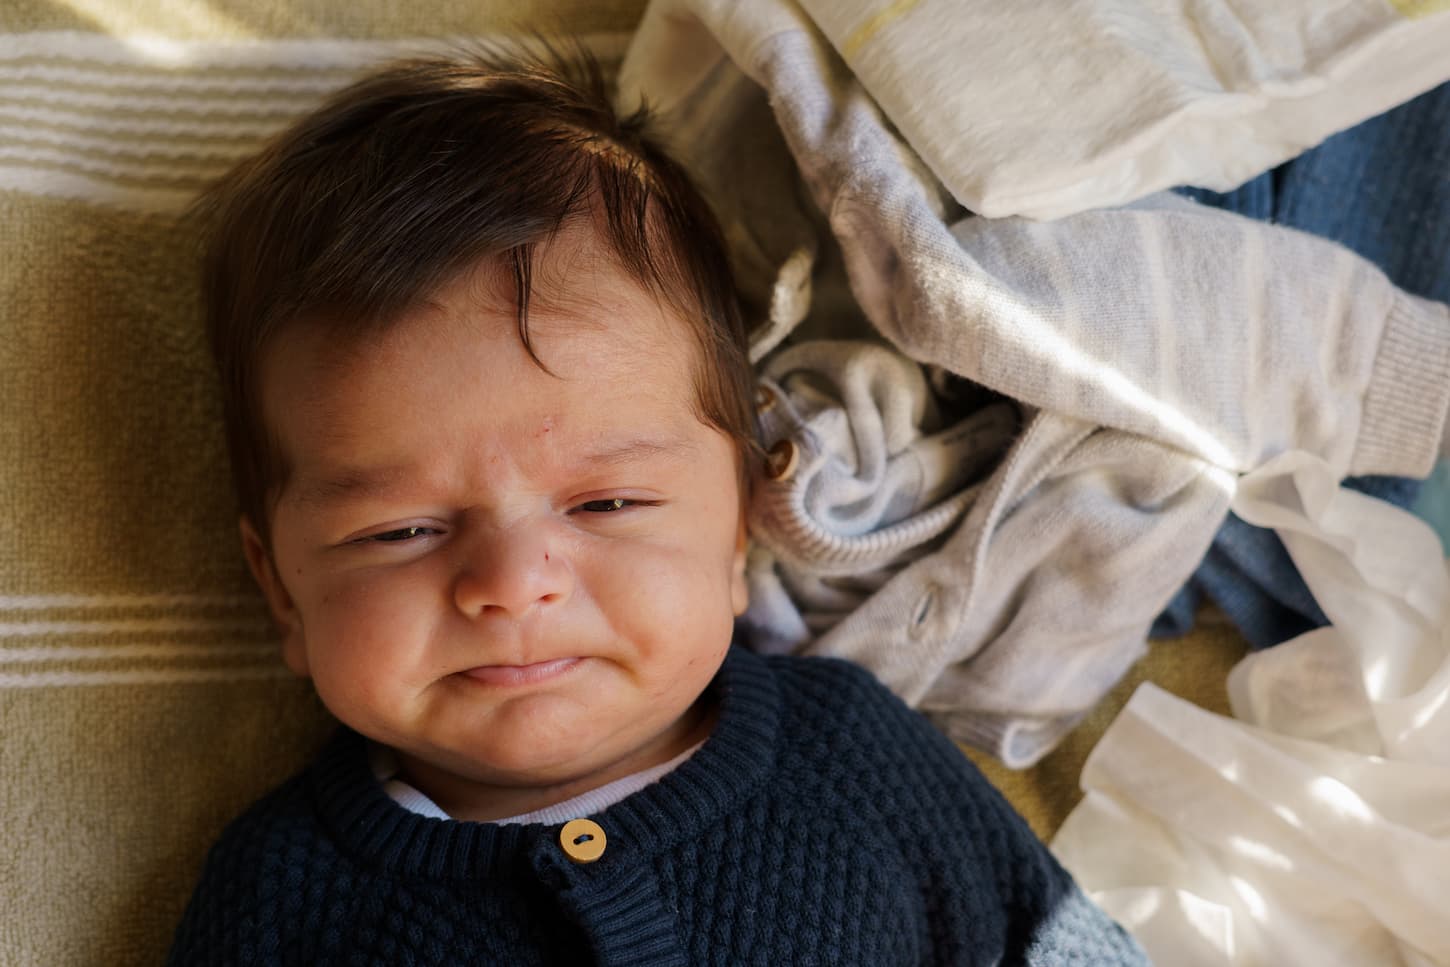 An image of a little one-month-old baby with an angry face.